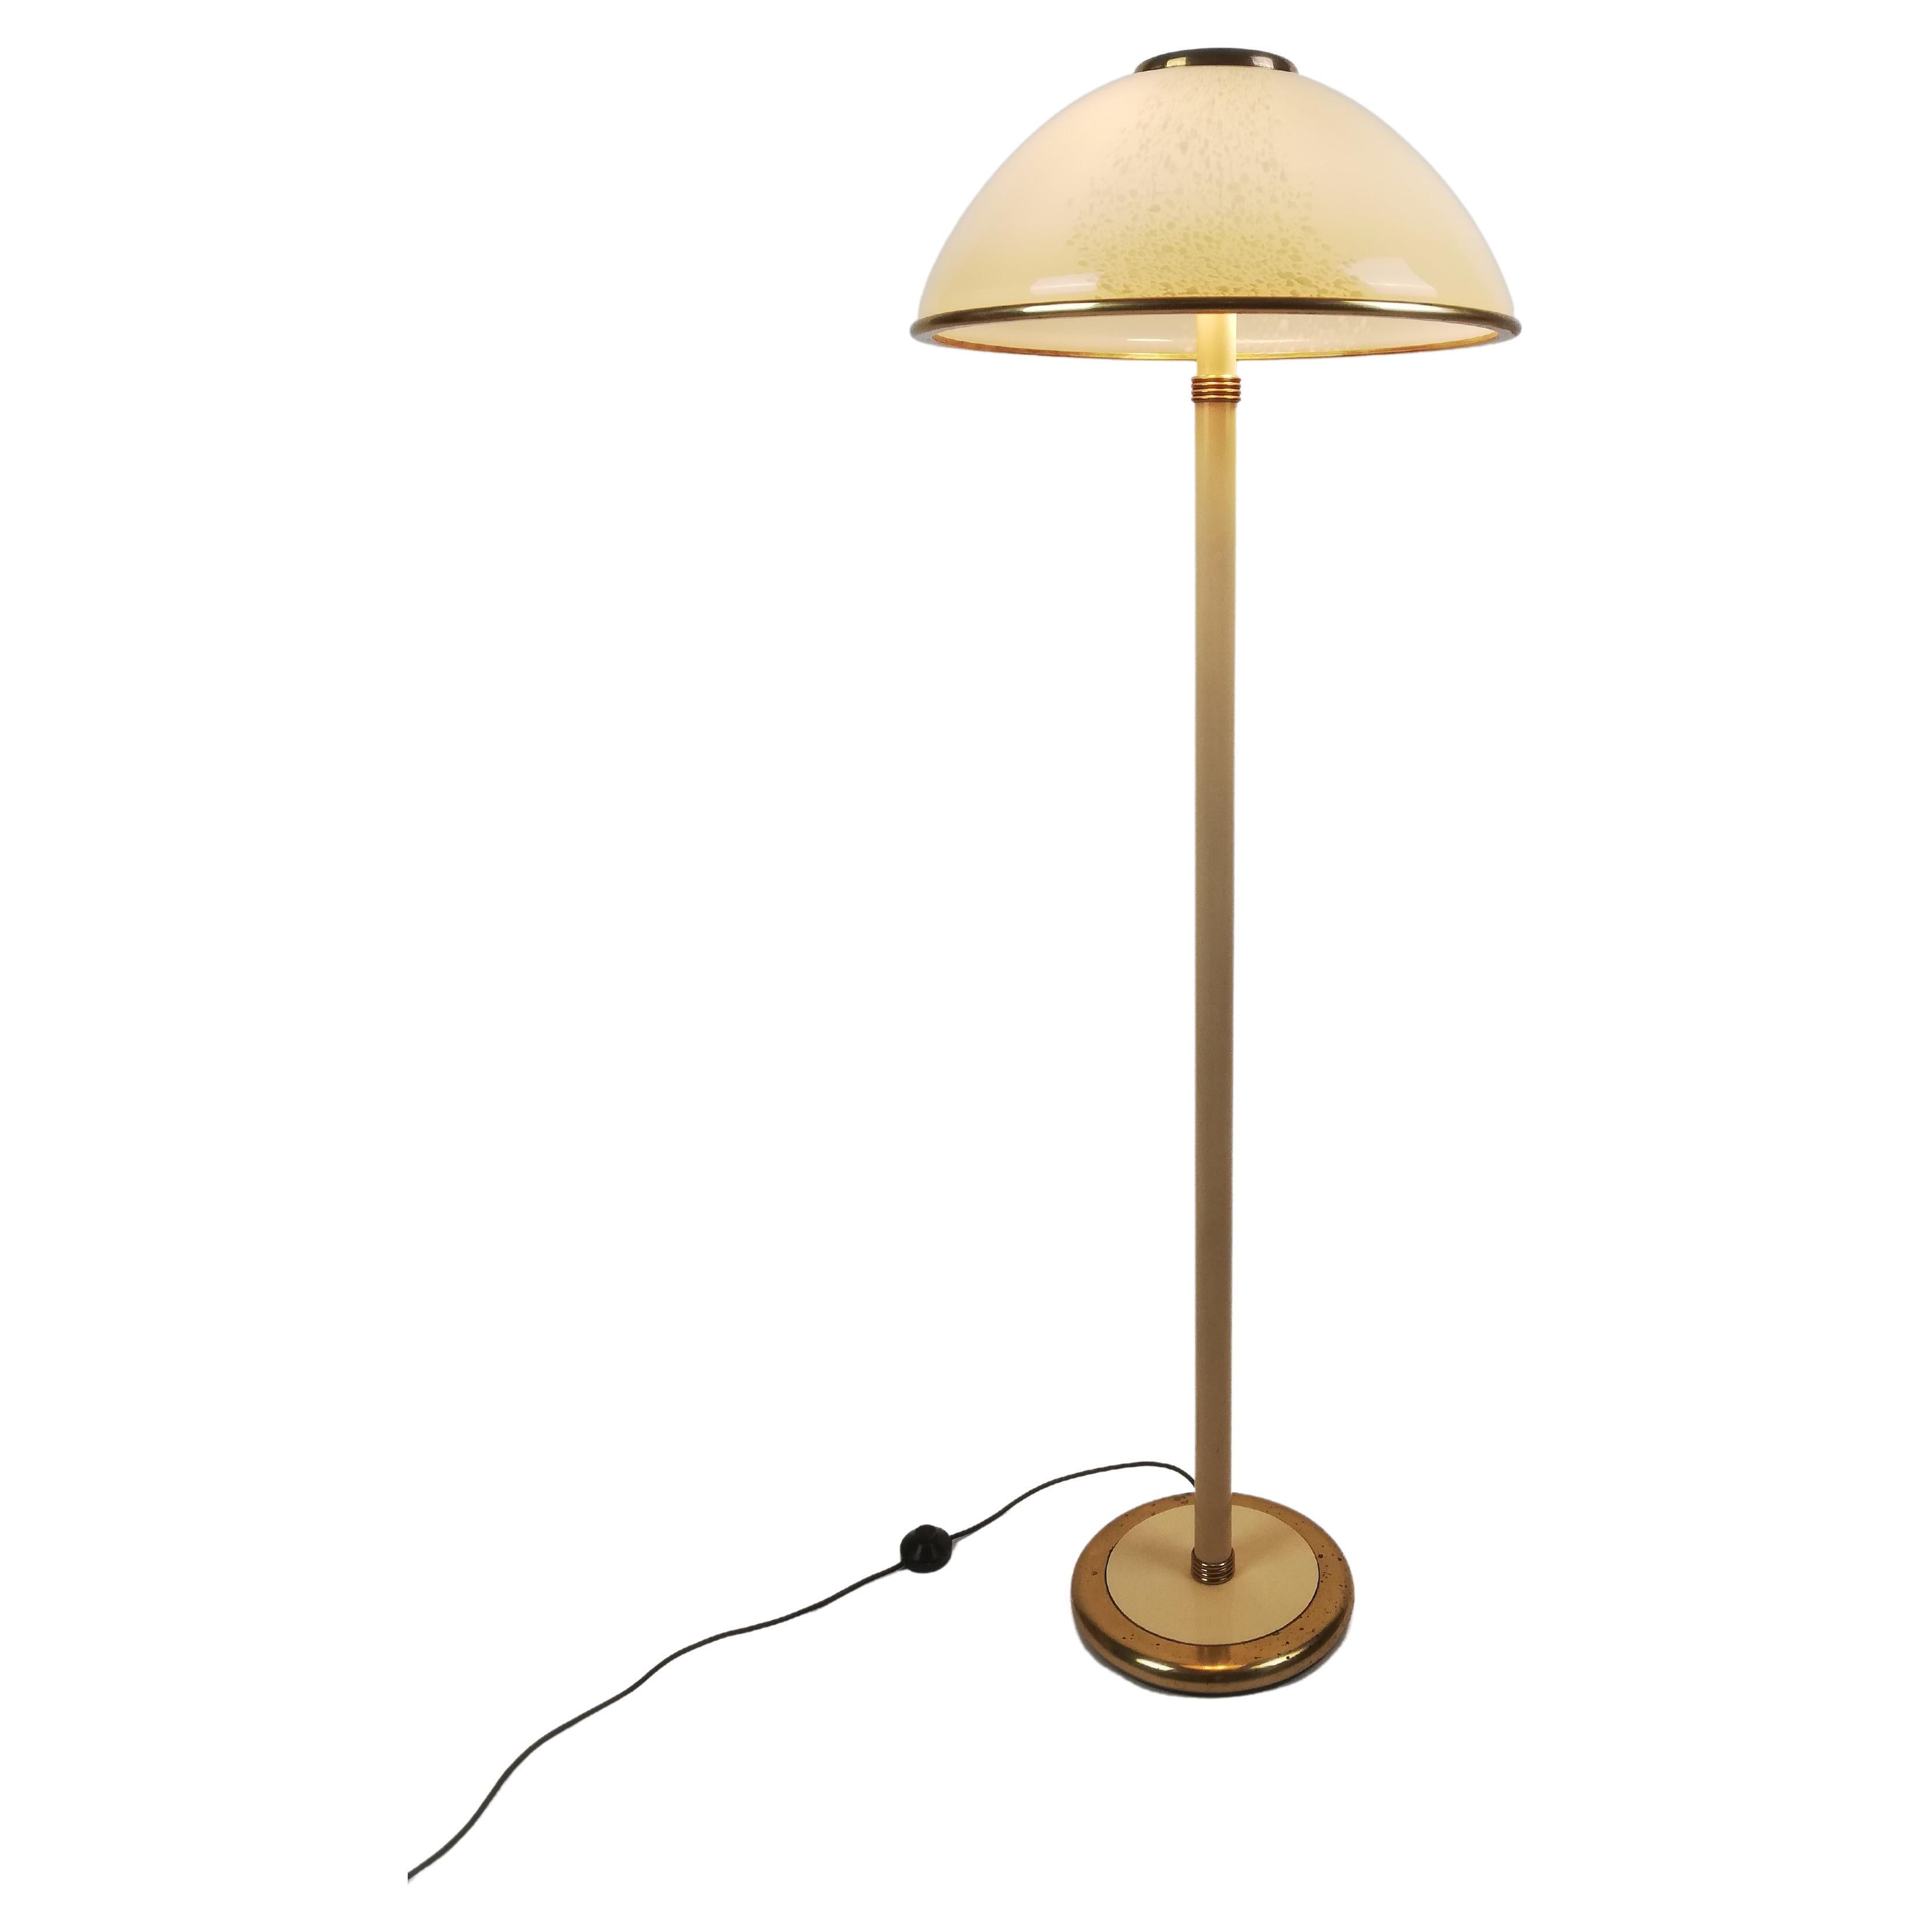 1970s Italian Floor Lamp in Brass and Artistic Murano Glass by F. Fabbian For Sale